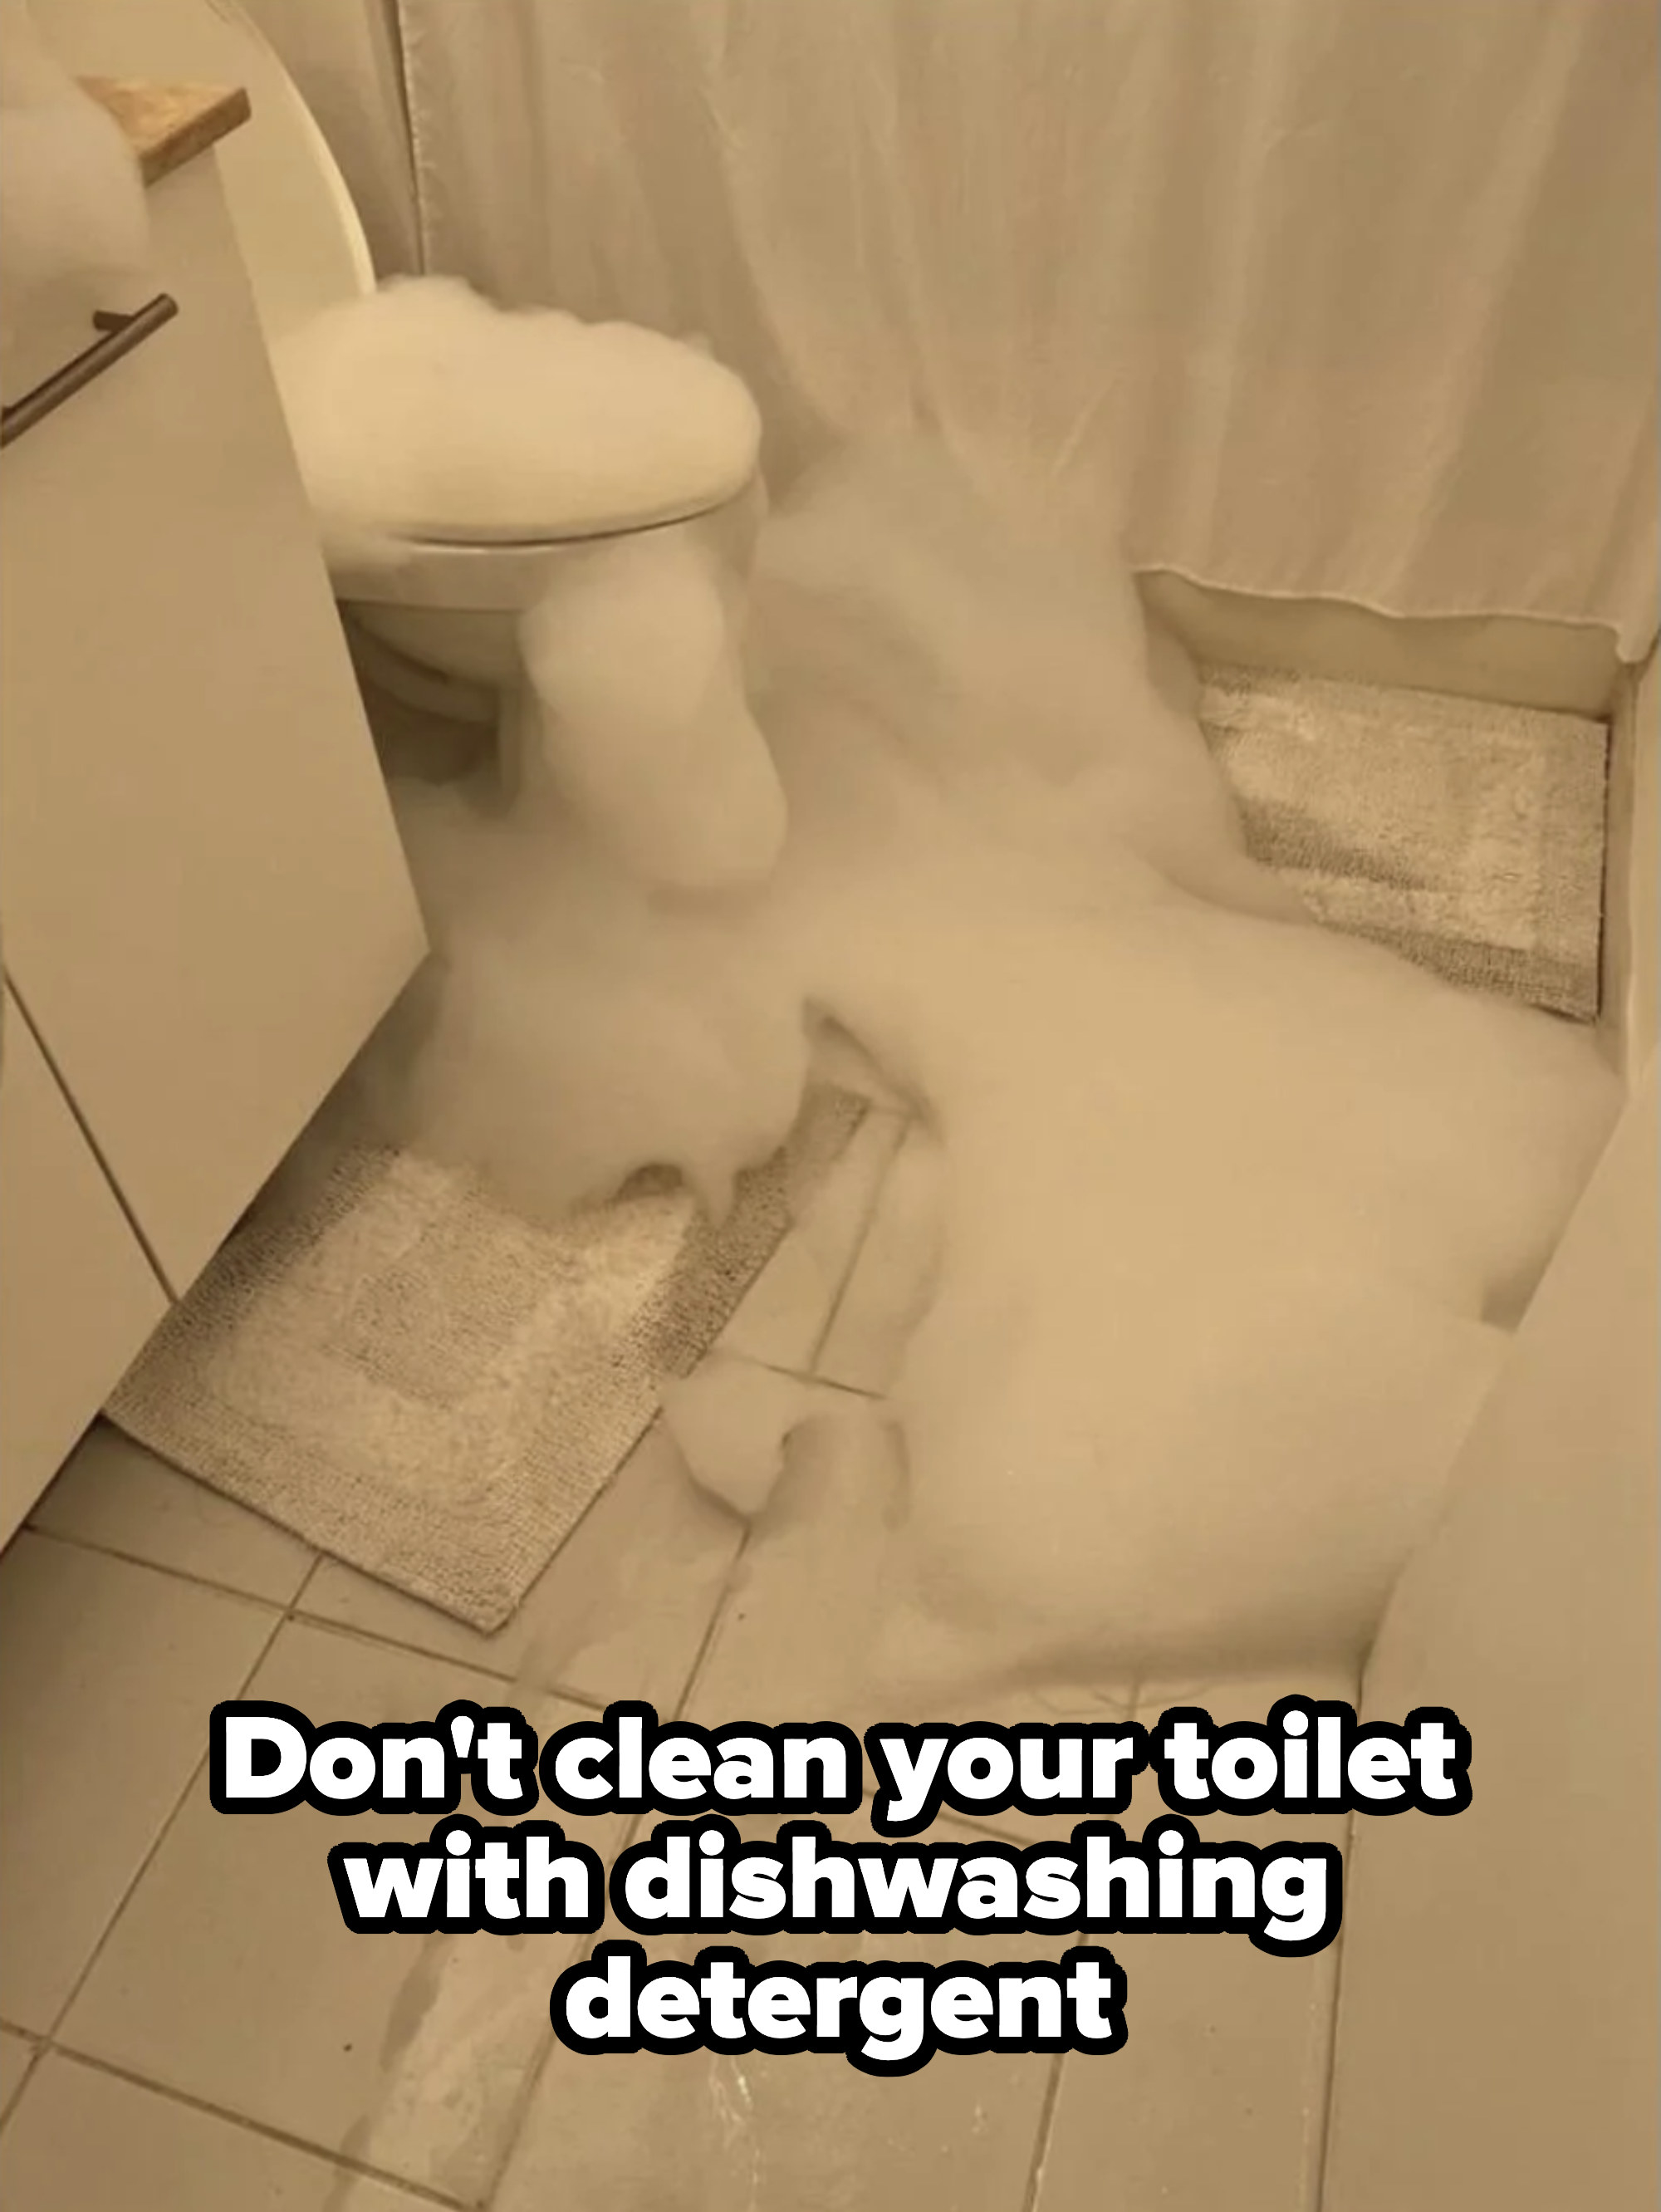 toilet cleaned with dishwasher detergent that blew up